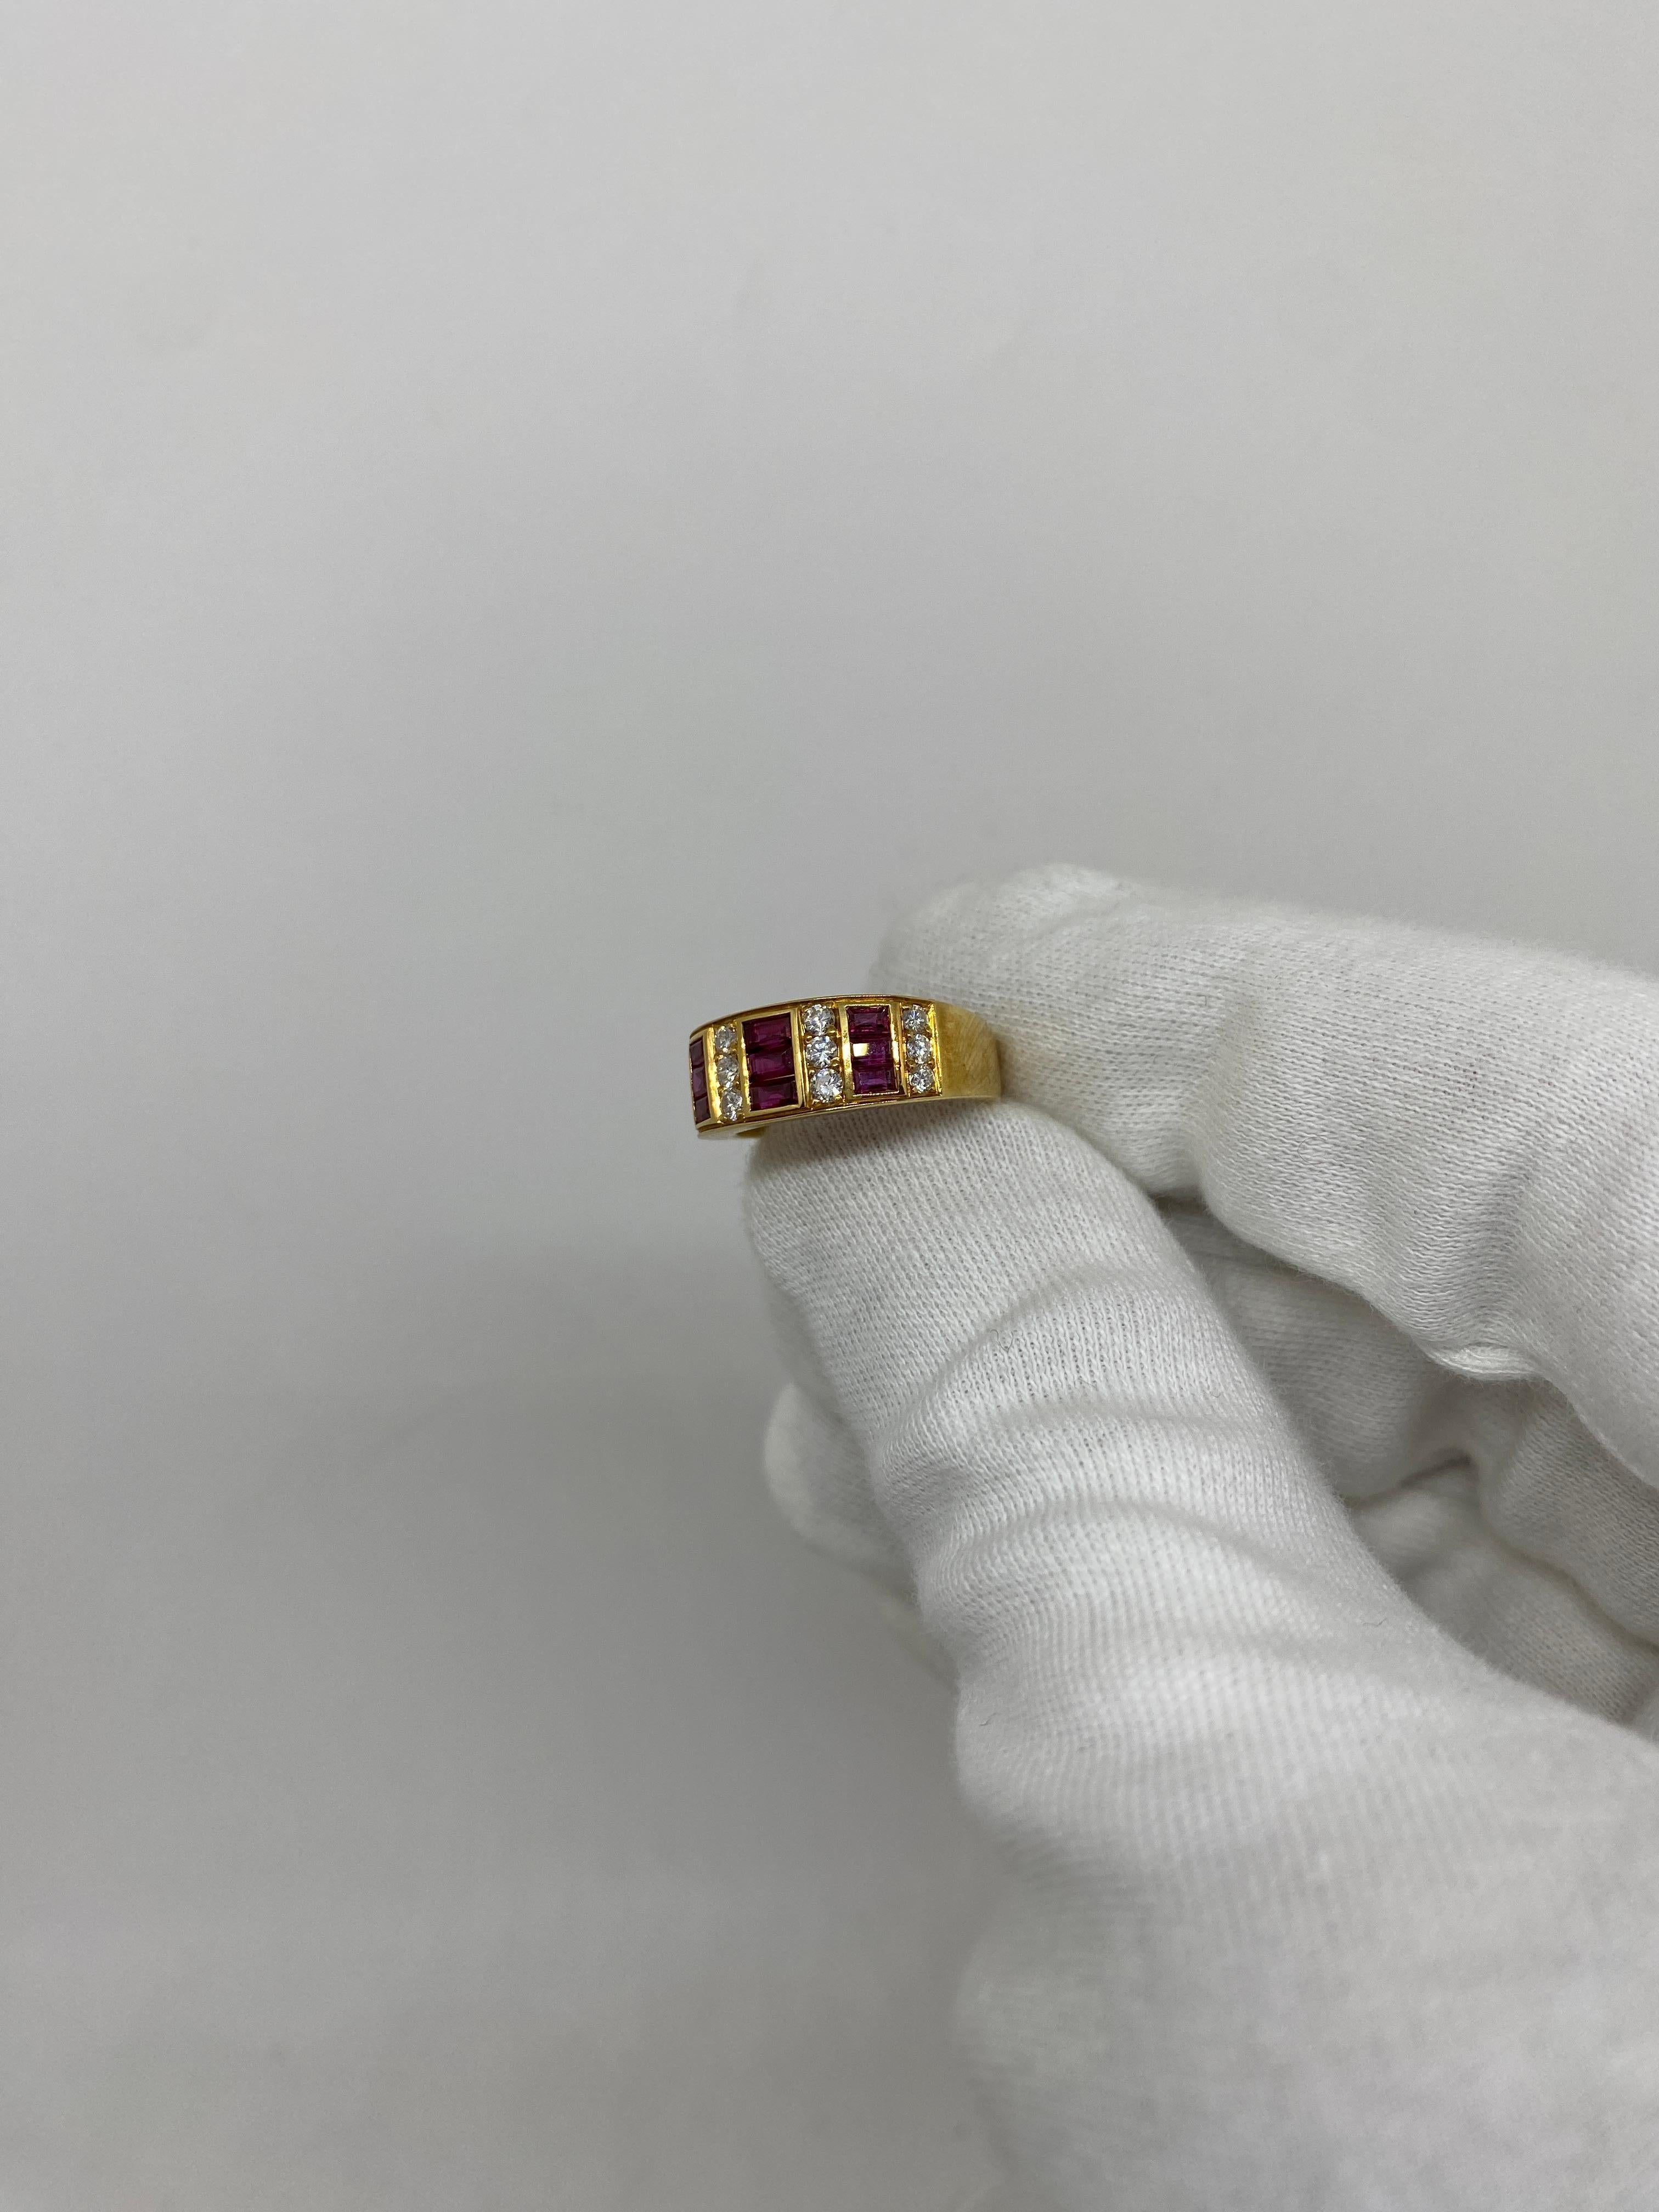 Ring made of 18kt yellow gold with natural brilliant-cut diamonds for ct .0.39 and baguette-cut rubies for ct.0.95

Welcome to our jewelry collection, where every piece tells a story of timeless elegance and unparalleled craftsmanship. As a